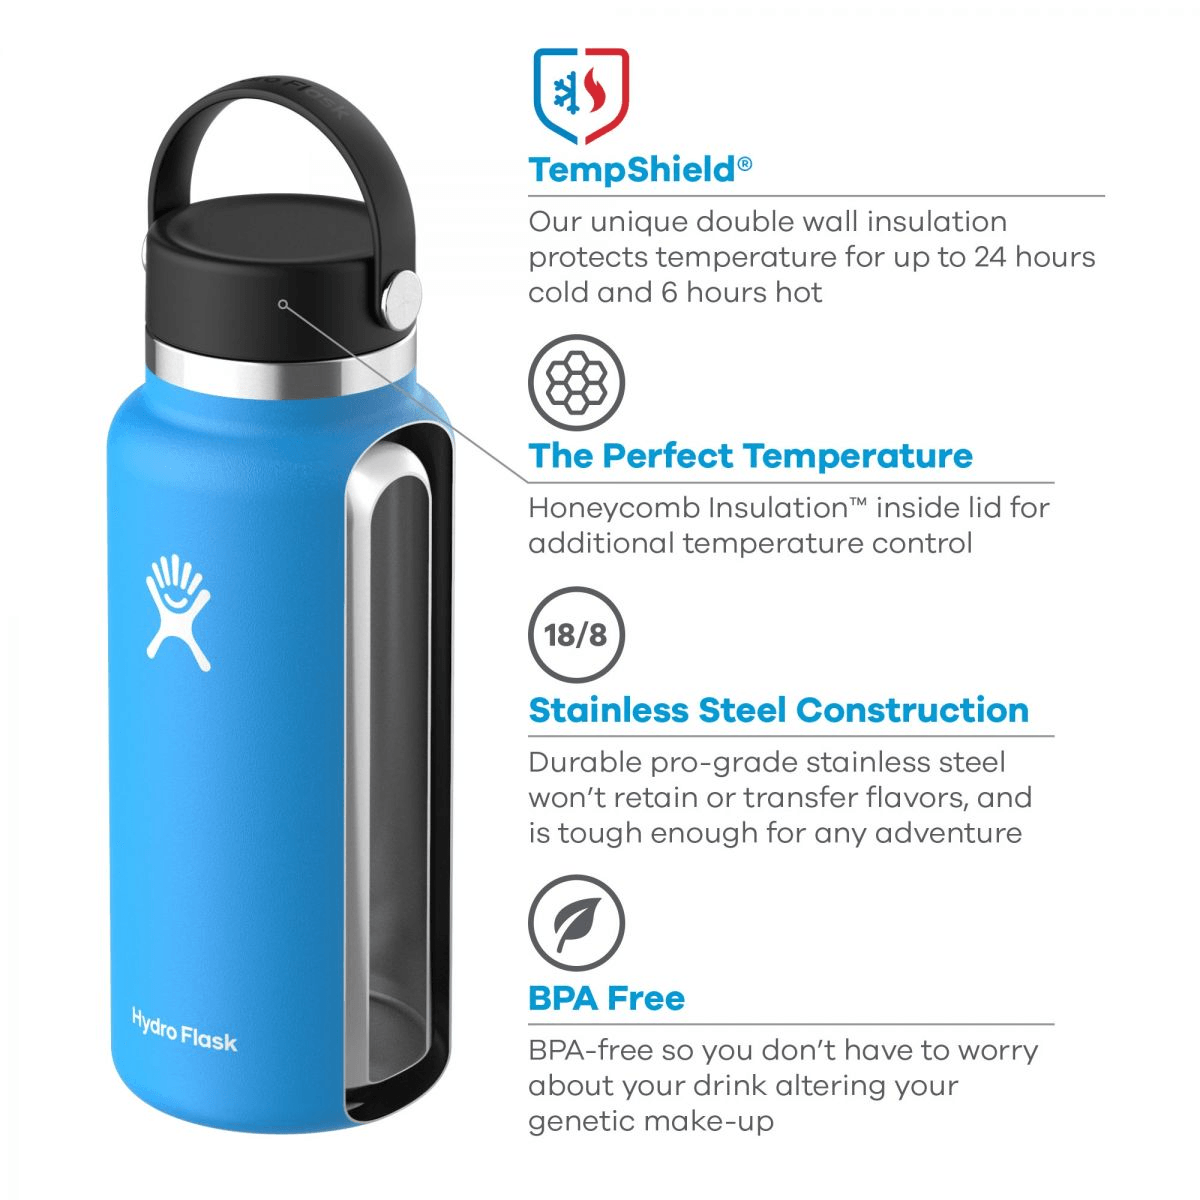 Hydro Flask 16oz/32oz/40oz Fashion Stainless Steel Insulated Cup